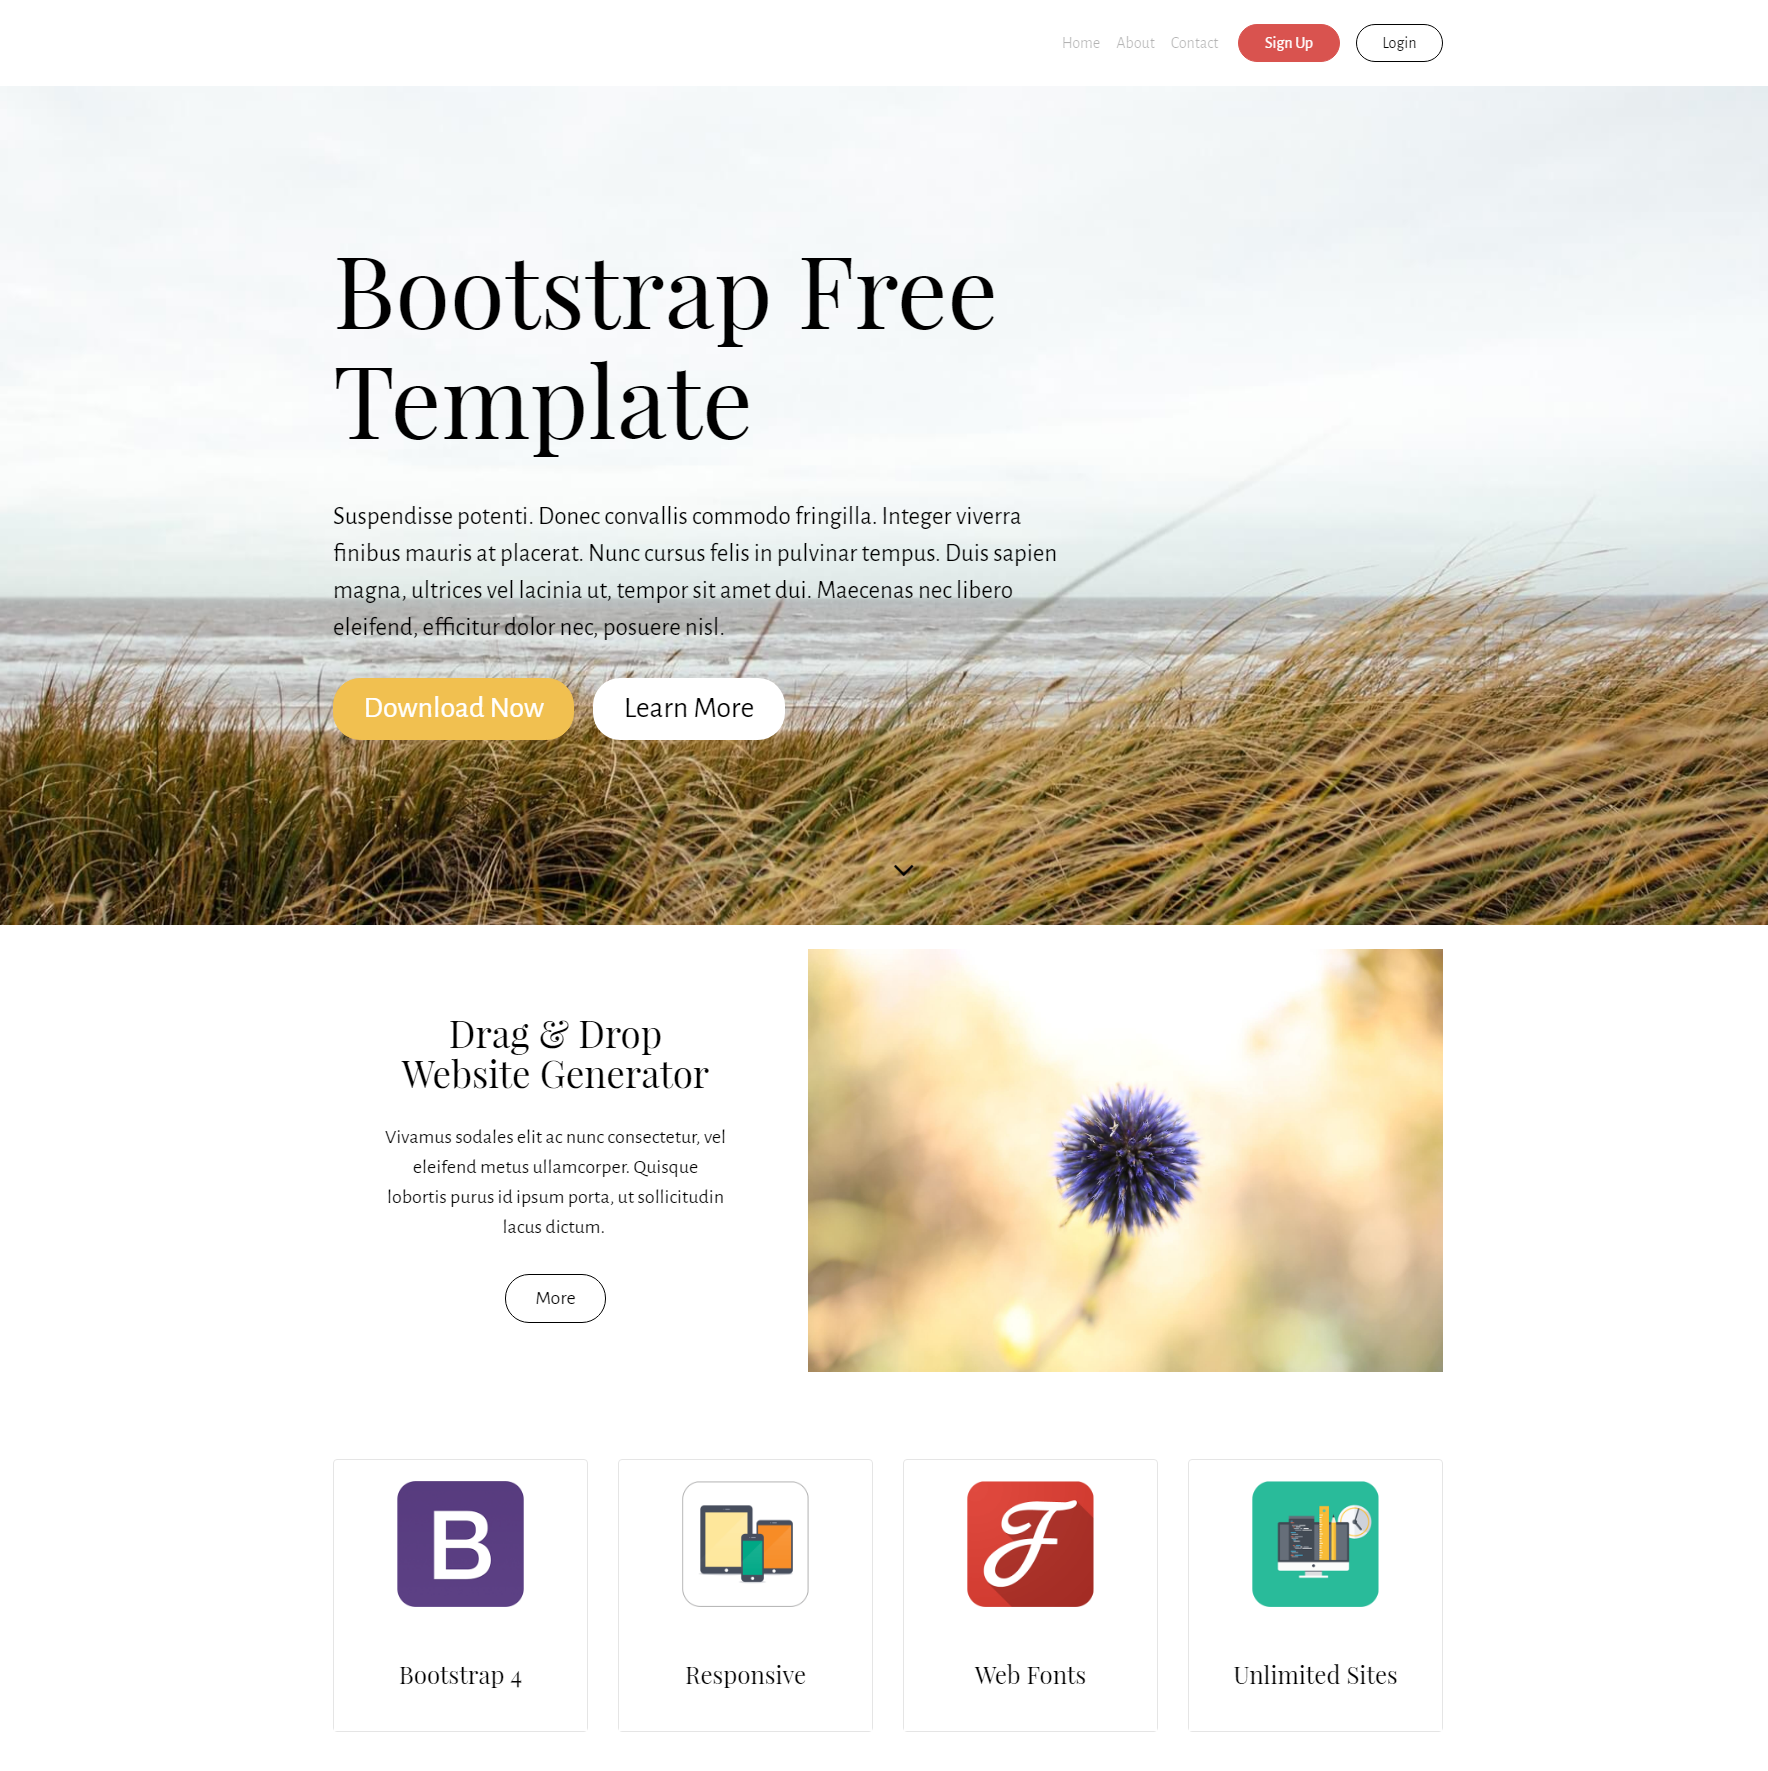 Download Bootstrap Free Templates